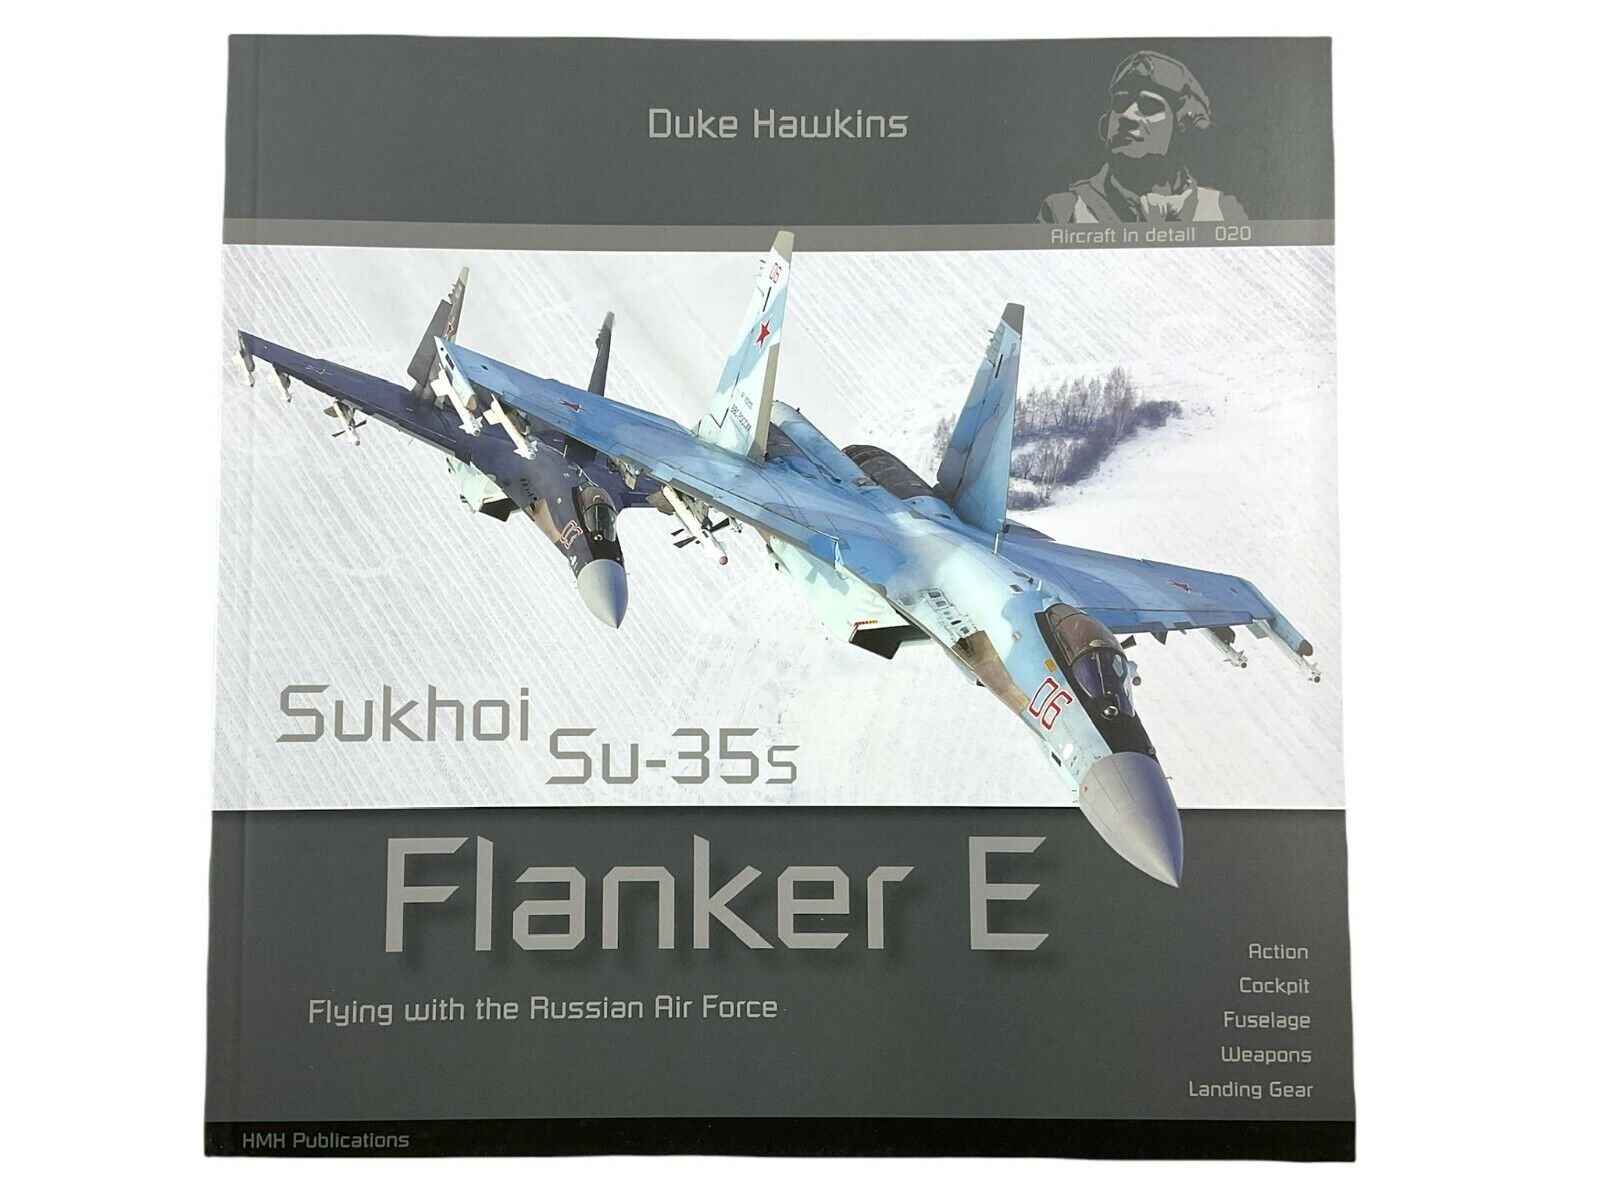 Russian Sukhoi Su-35s Flanker E Aircraft Soft Cover Reference Book